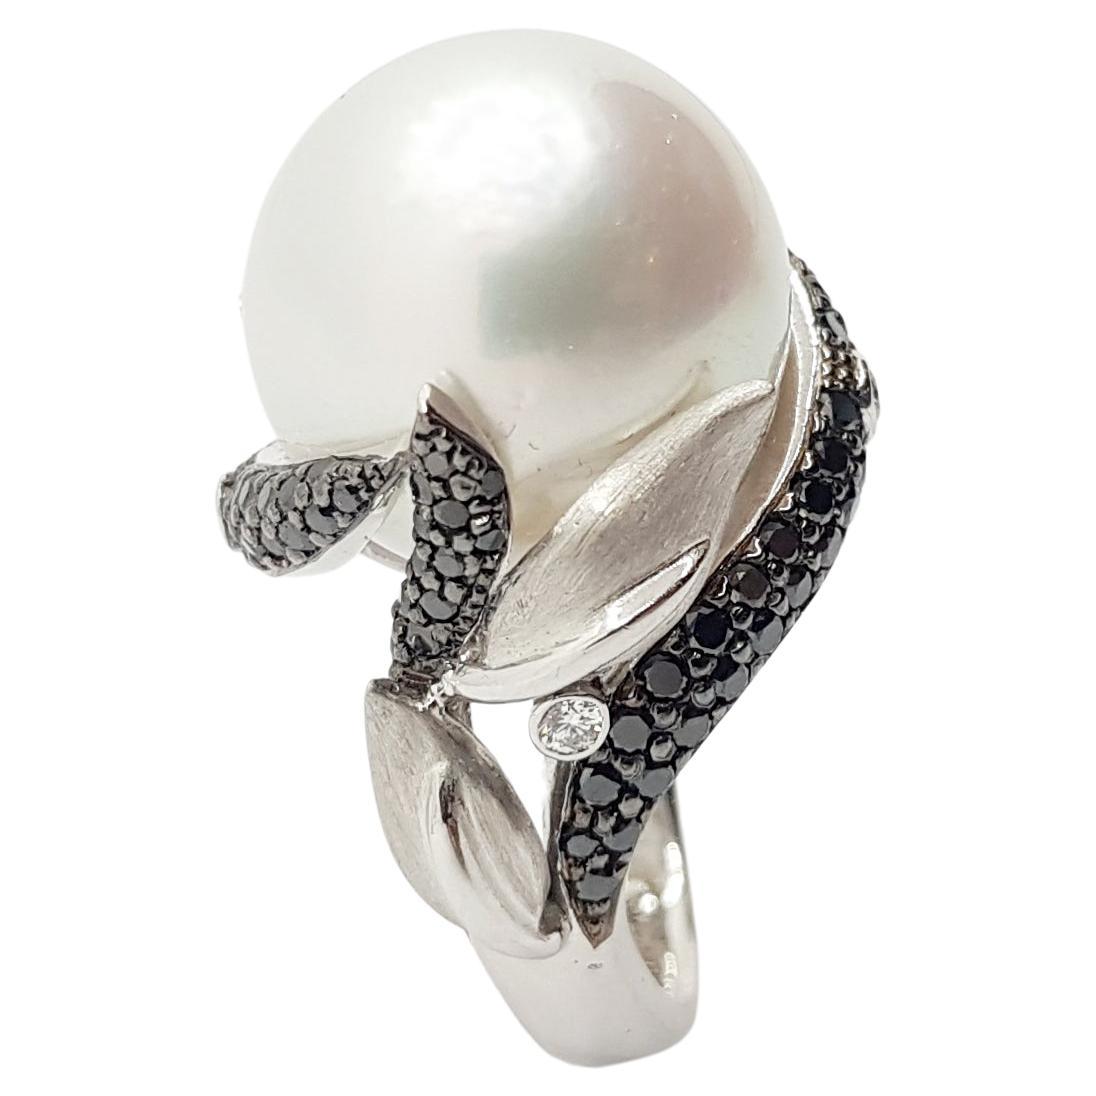 South Sea Pearl with Diamond 0.12 carat and Black Diamond 1.23 carats Ring set in 18 Karat White Gold Settings

Width:  2.0 cm 
Length: 2.0 cm
Ring Size: 51
Total Weight: 20.58 grams

South Sea Pearl:  16.6 mm

